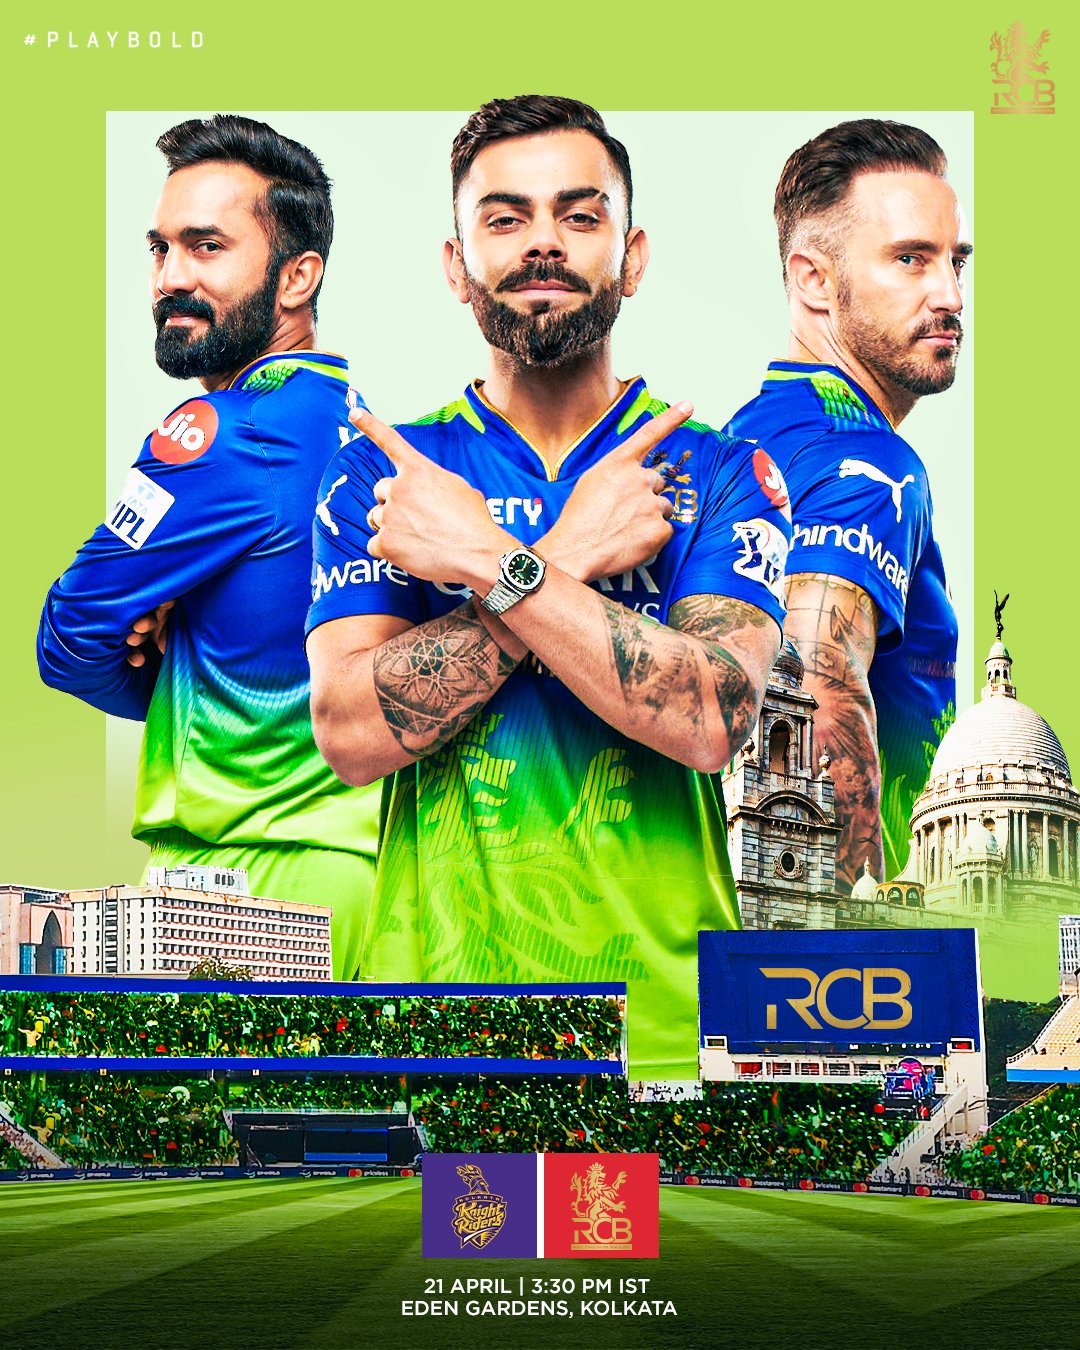 when will rcb play in green jersey